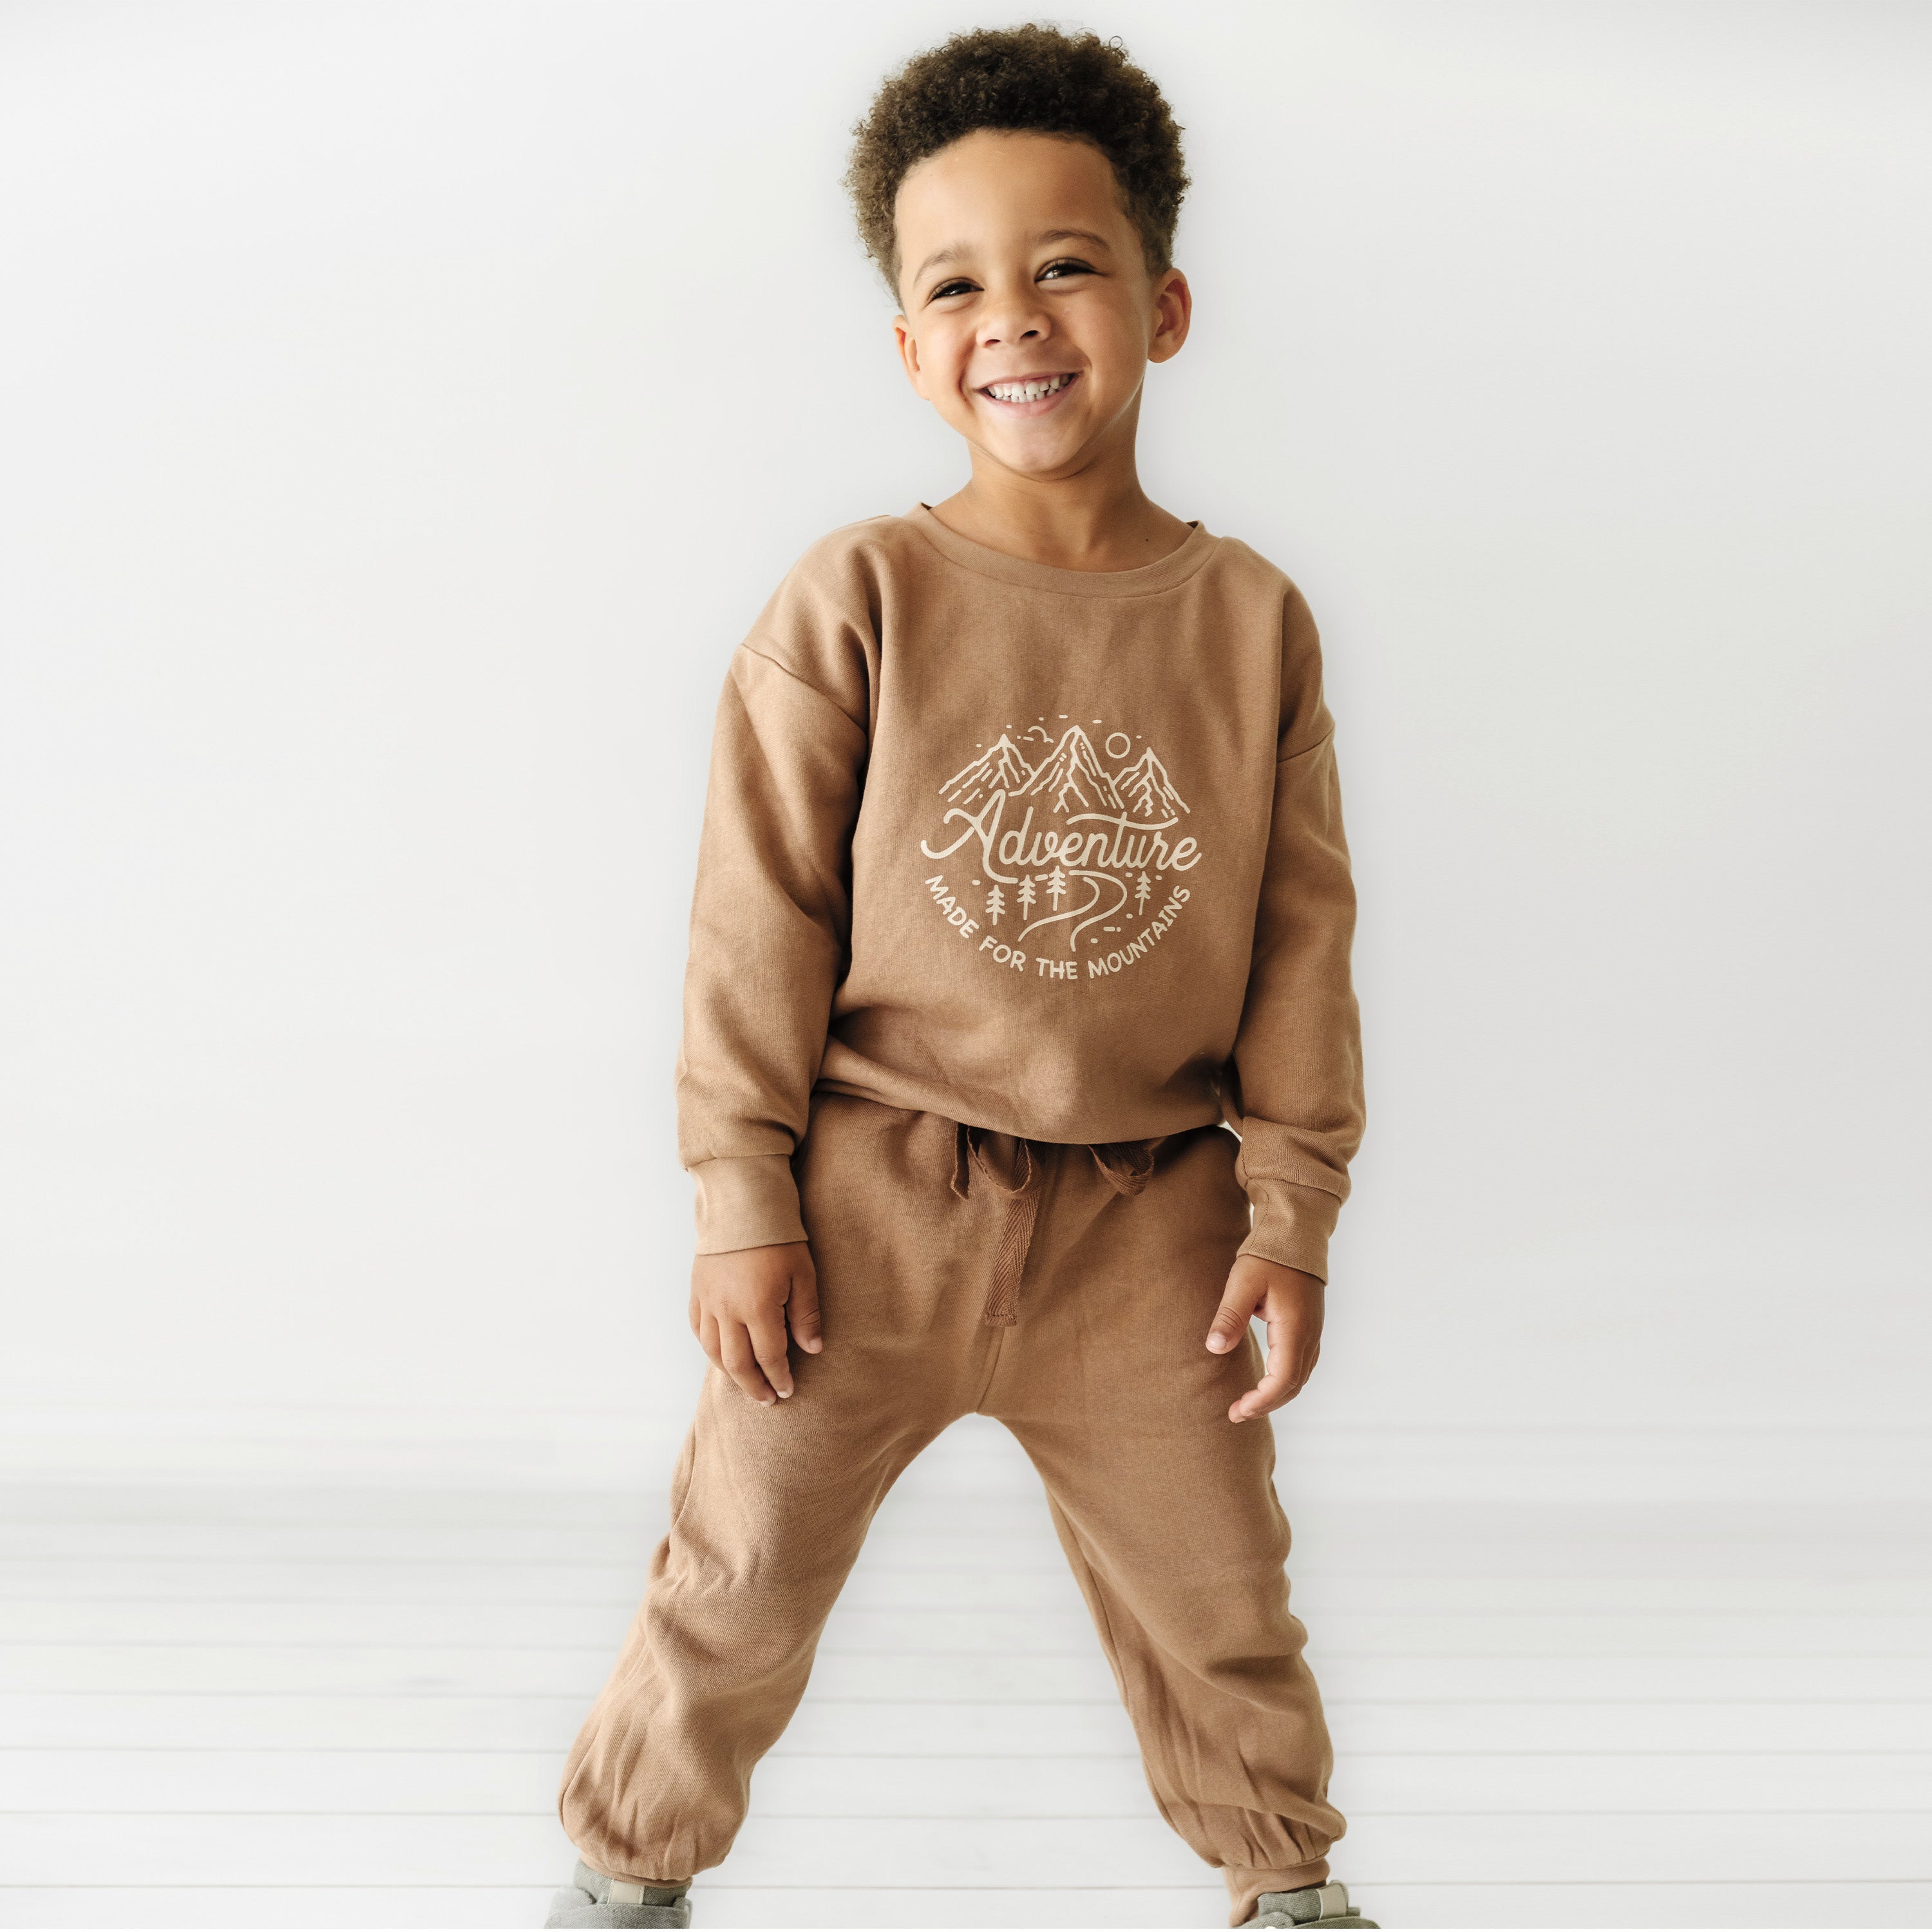 A young boy with curly hair smiles while wearing a brown sweatshirt and pants set from Organic Baby that reads "adventure" in white graphic text, standing confidently against a plain white background.